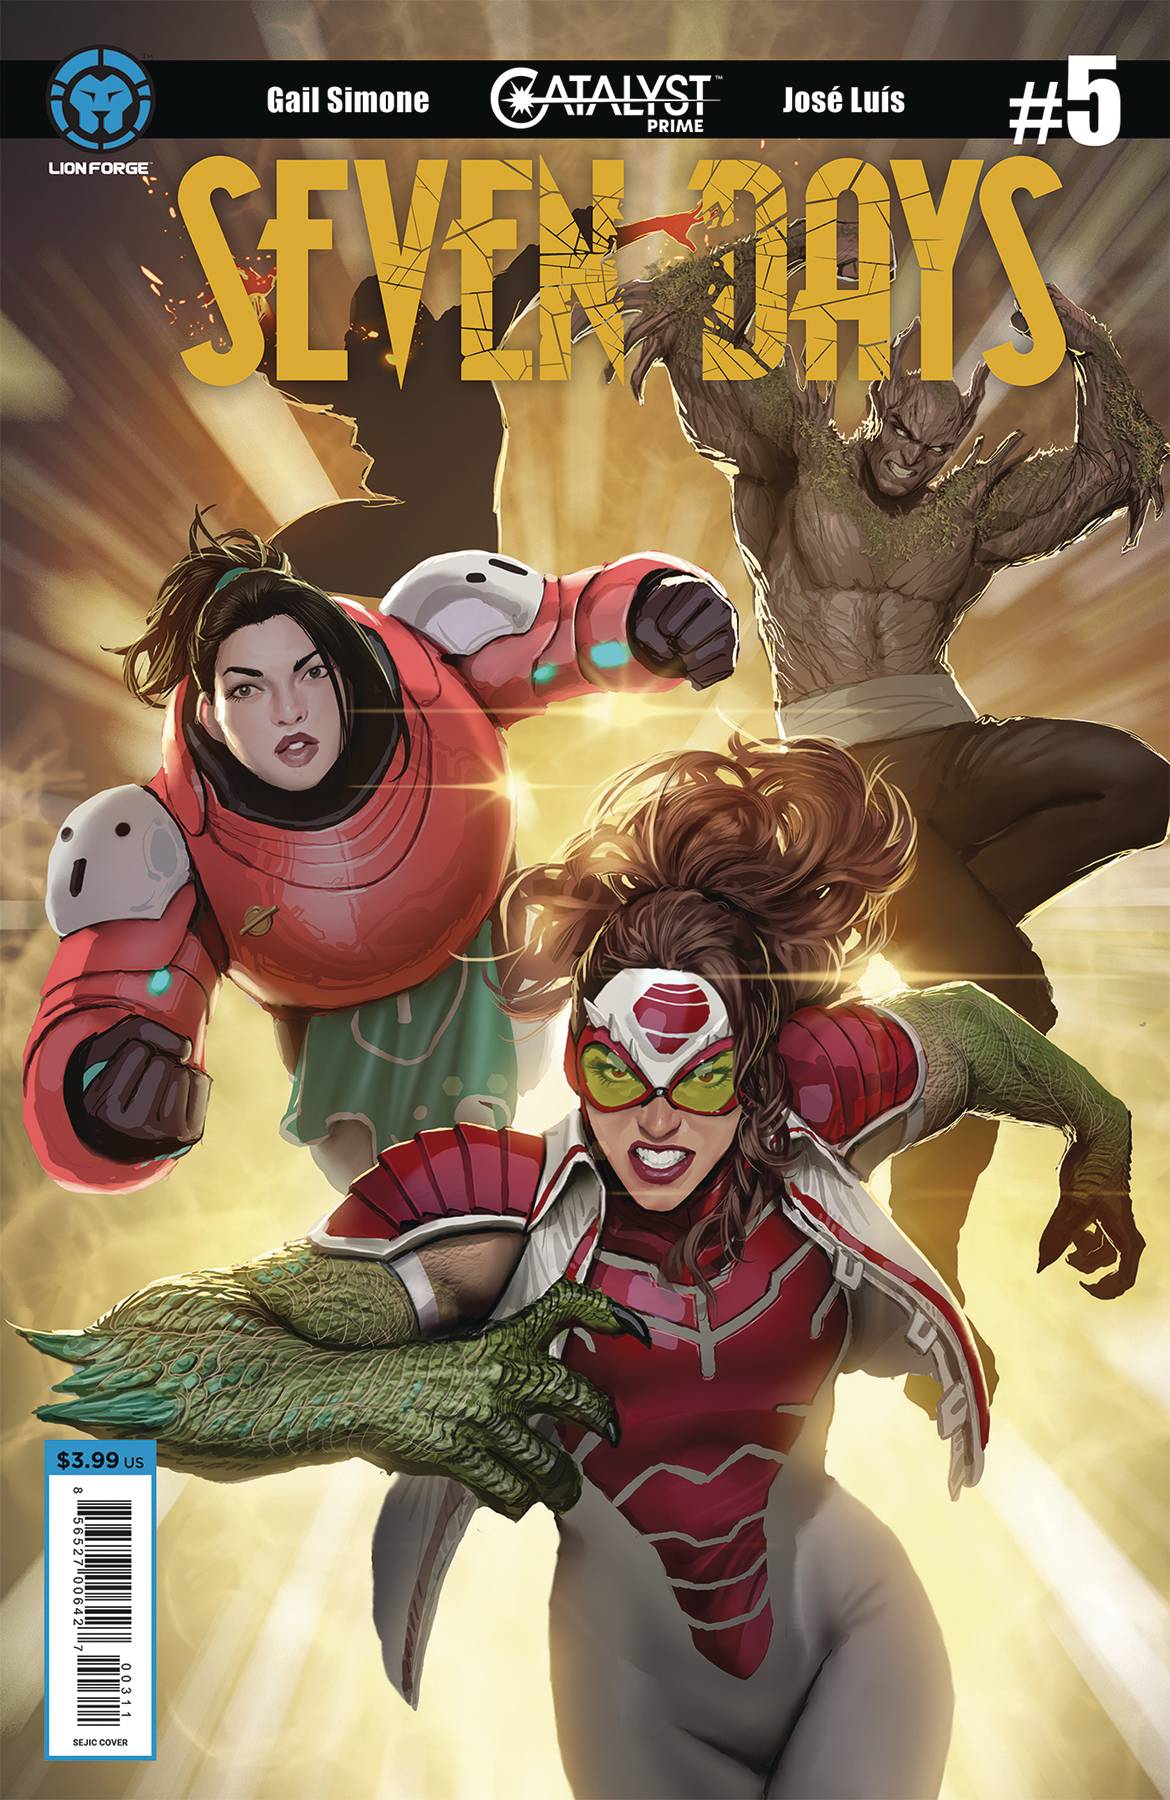 Catalyst Prime Seven Days #5 Cover A Sejic (Of 7)